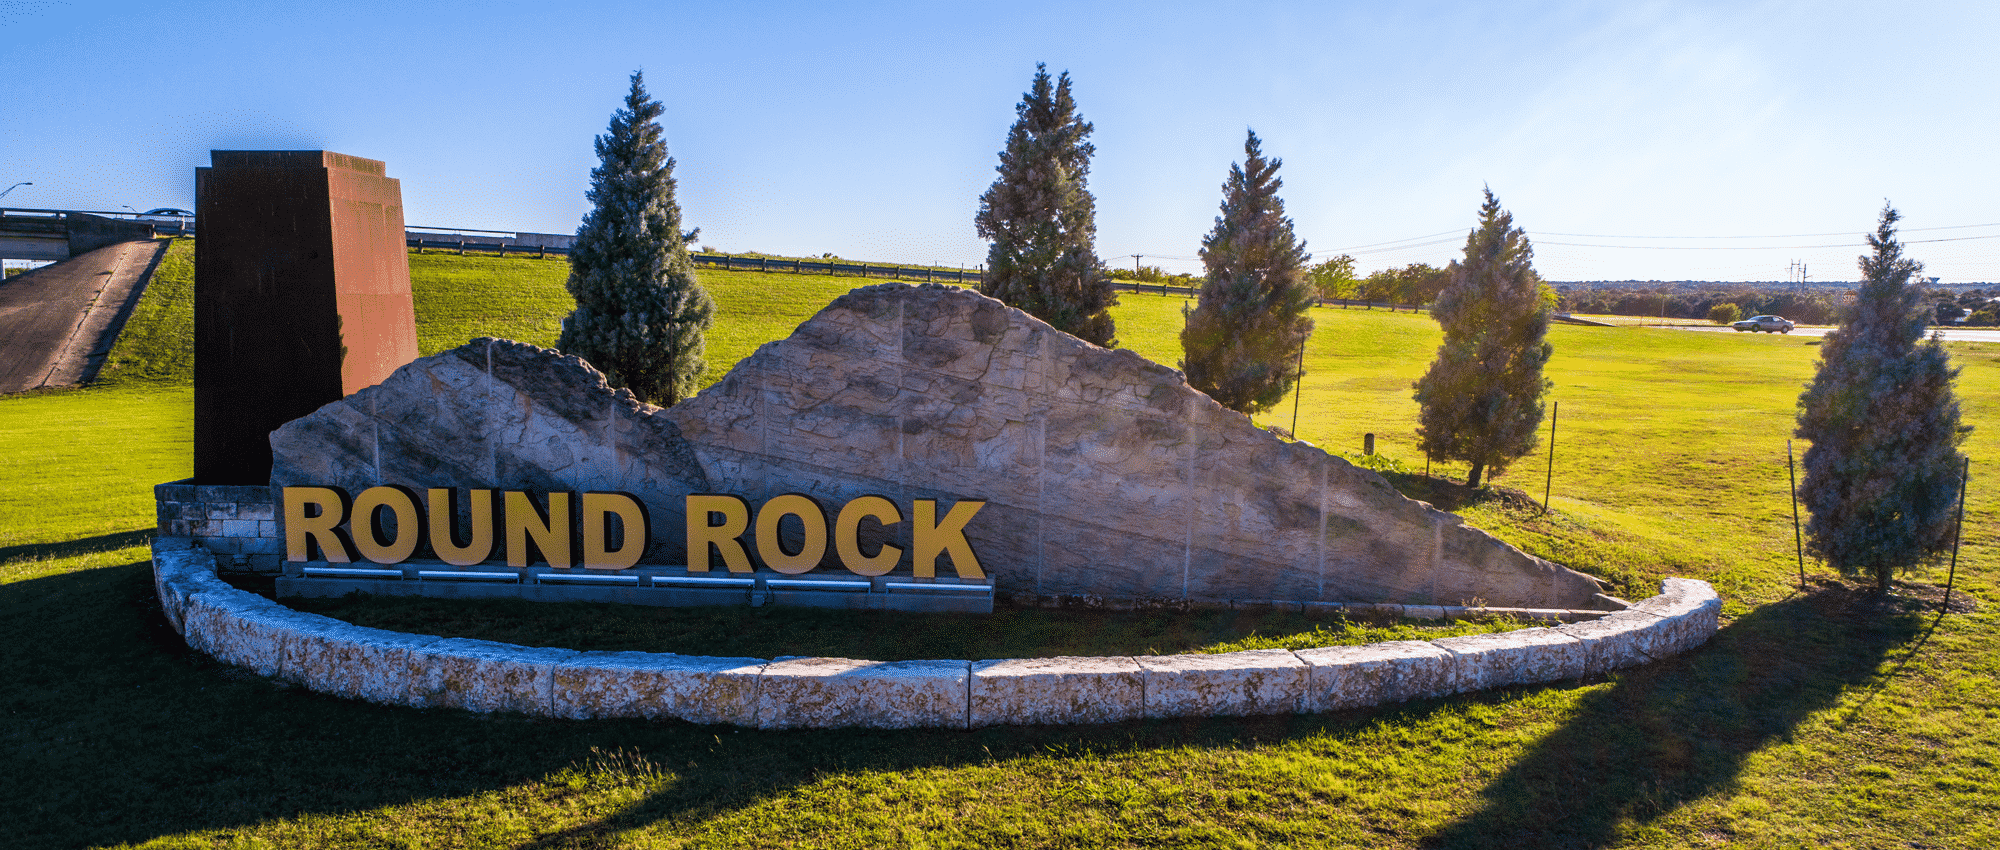 An Insider’s Guide to Round Rock, Texas Shopping, Baseball, and More